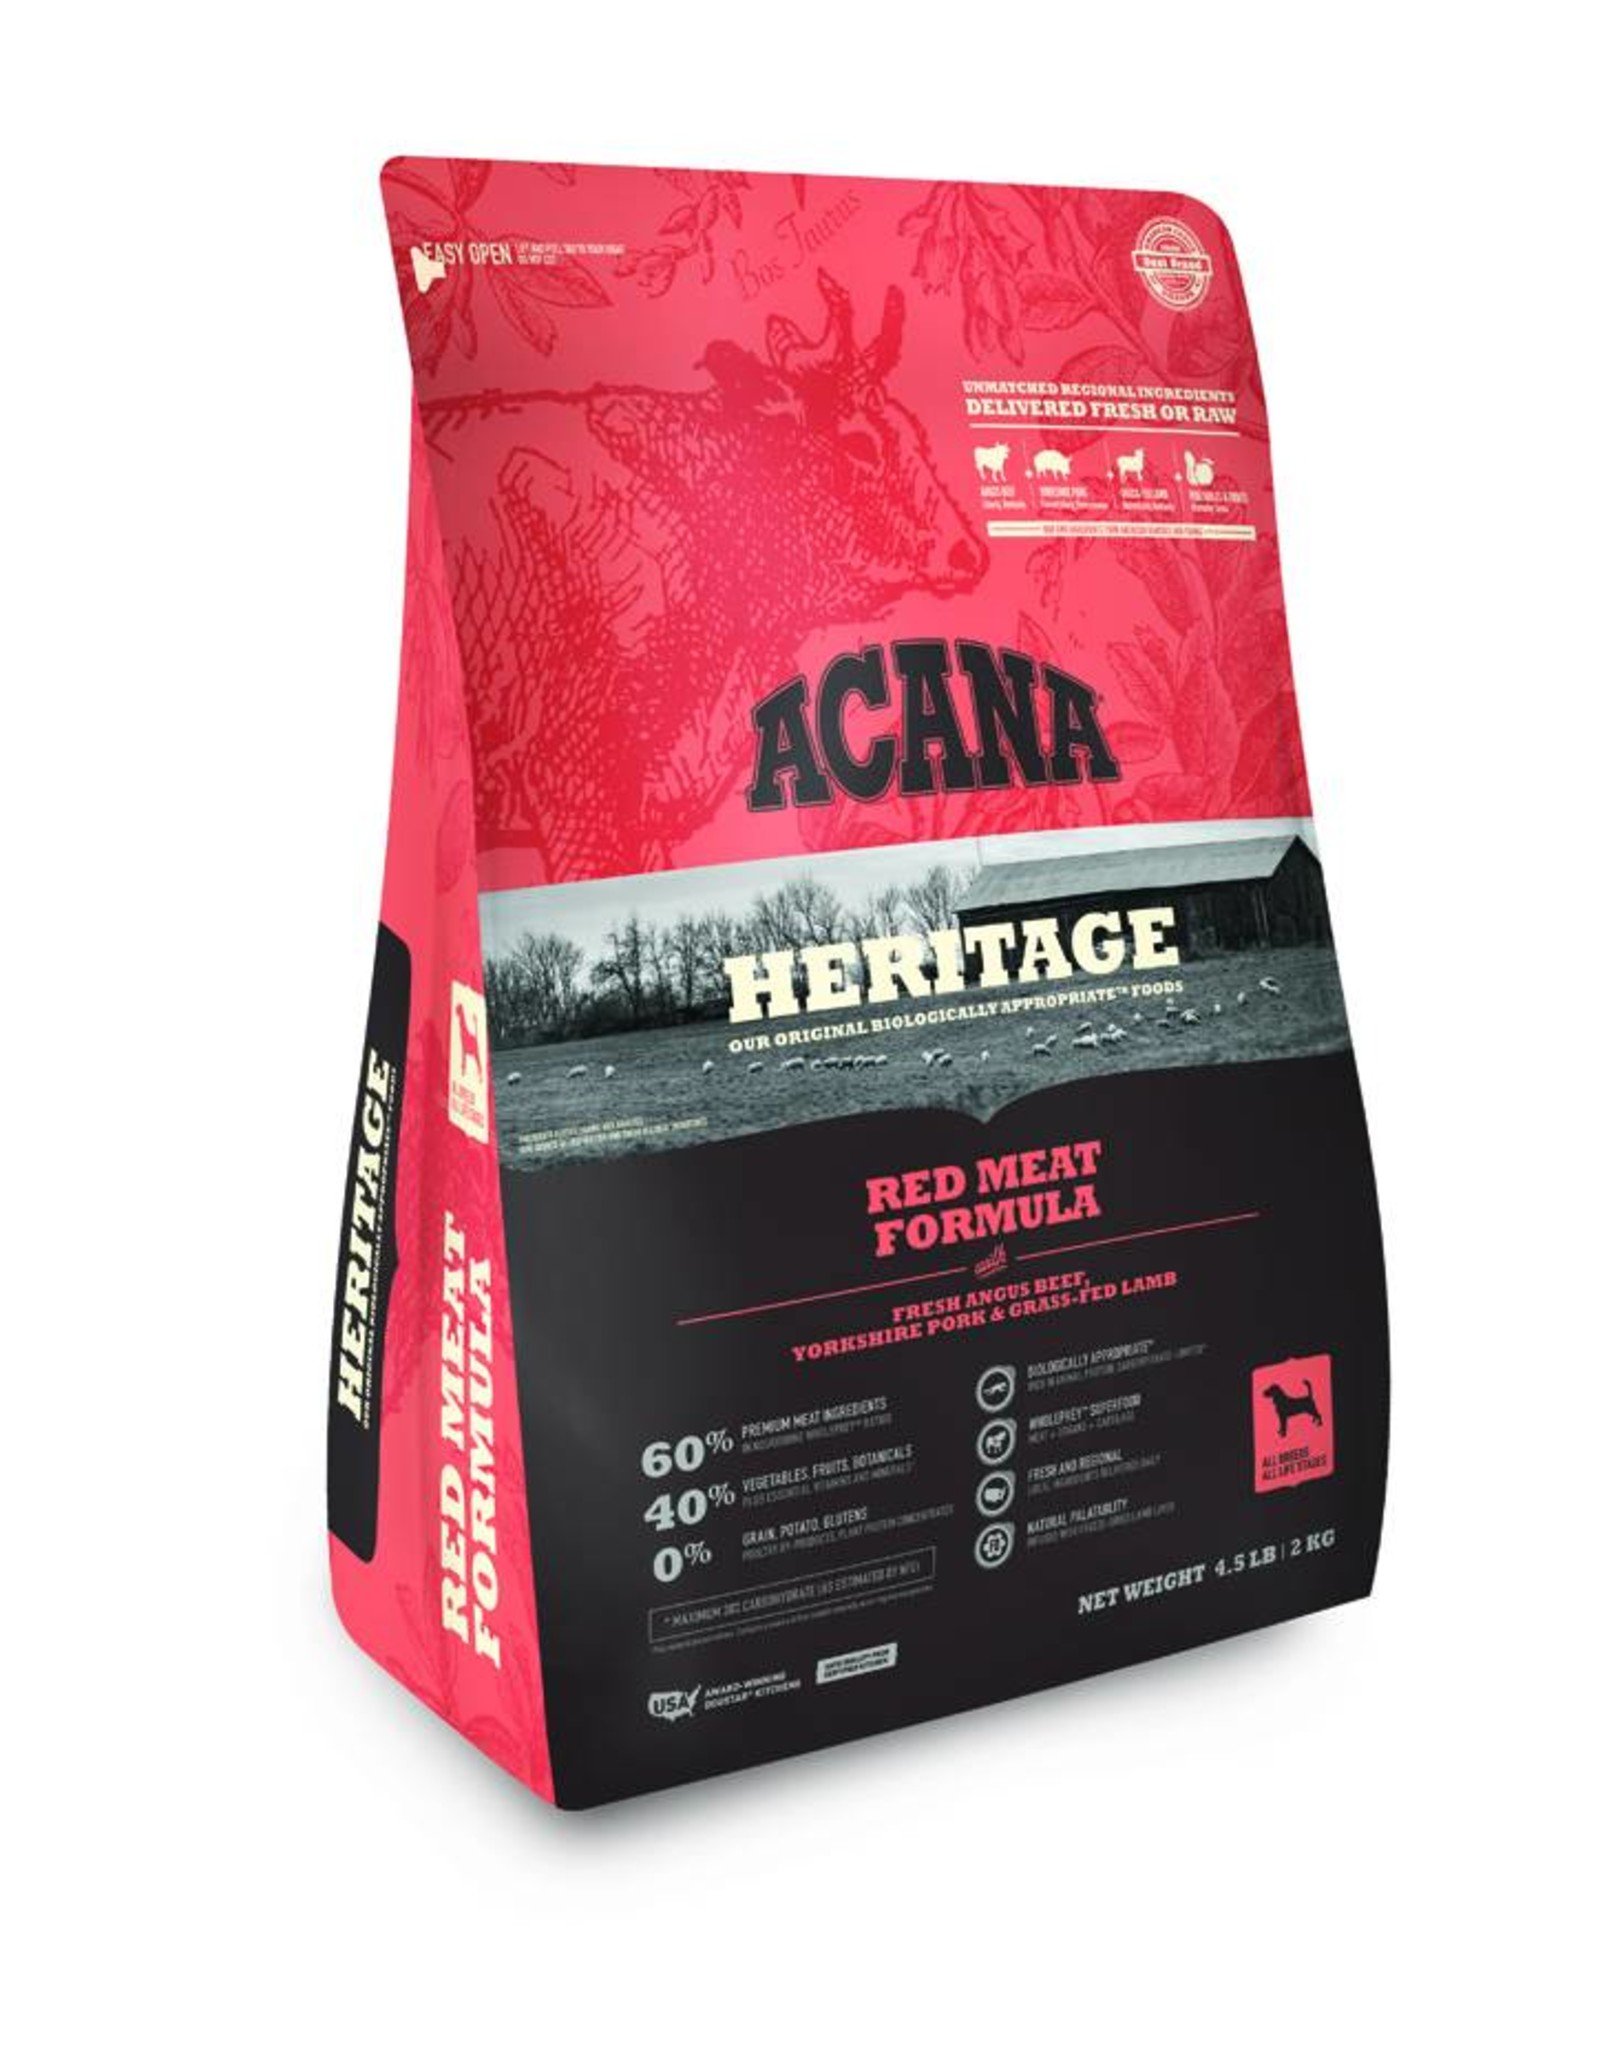 Acana Heritage Red Meats Formula Lucky Pet Dog Grooming, Westchase